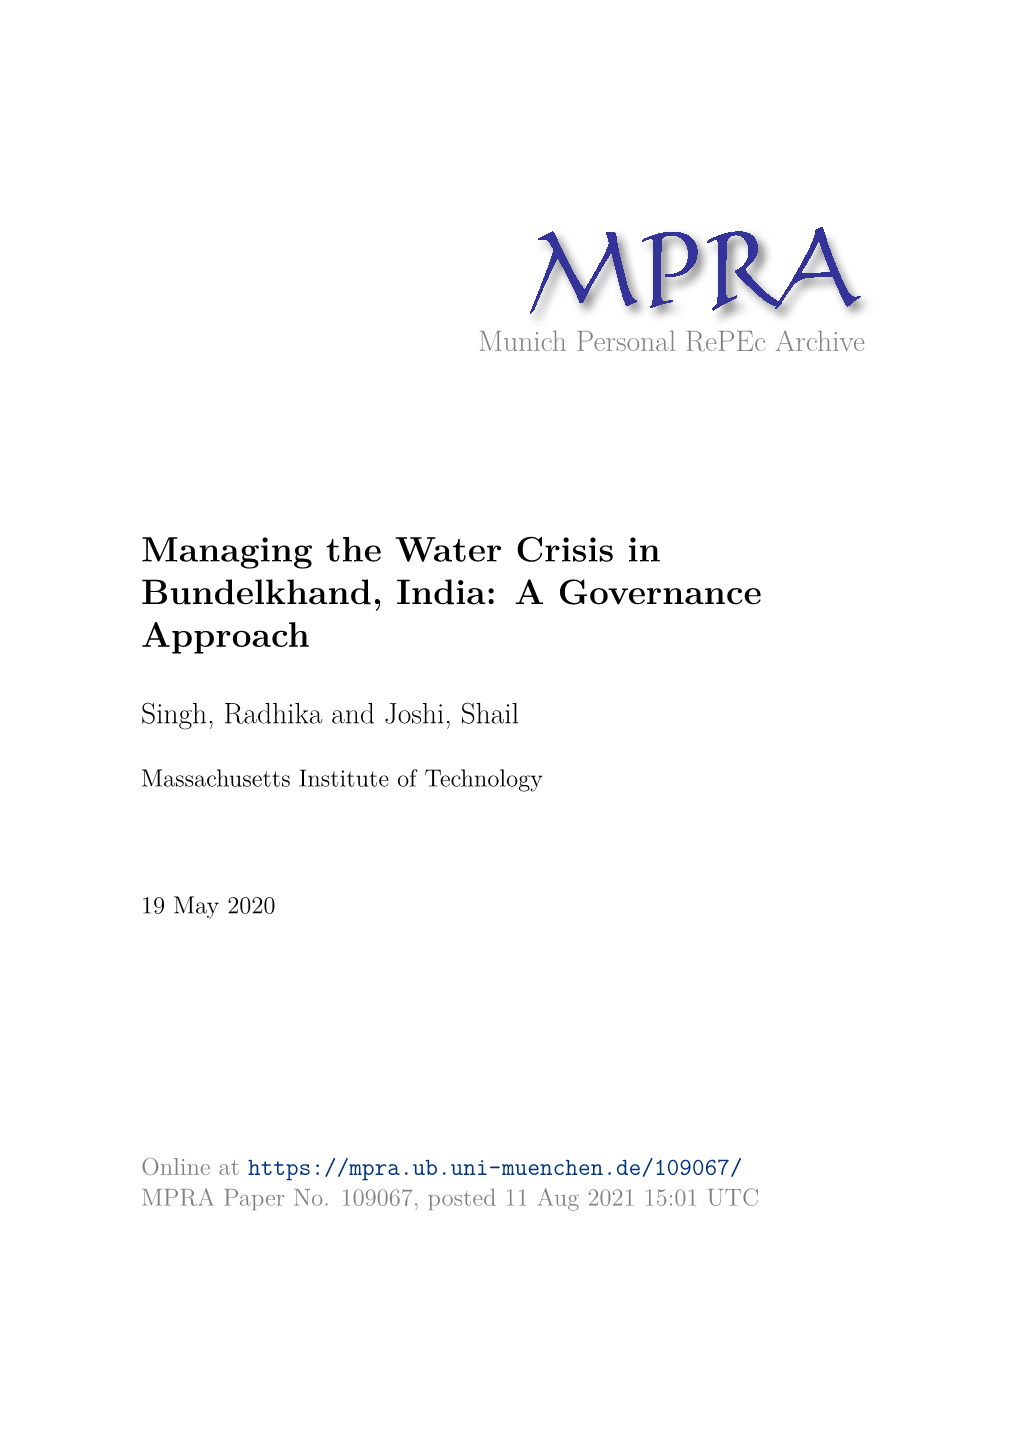 Managing the Water Crisis in Bundelkhand, India: a Governance Approach